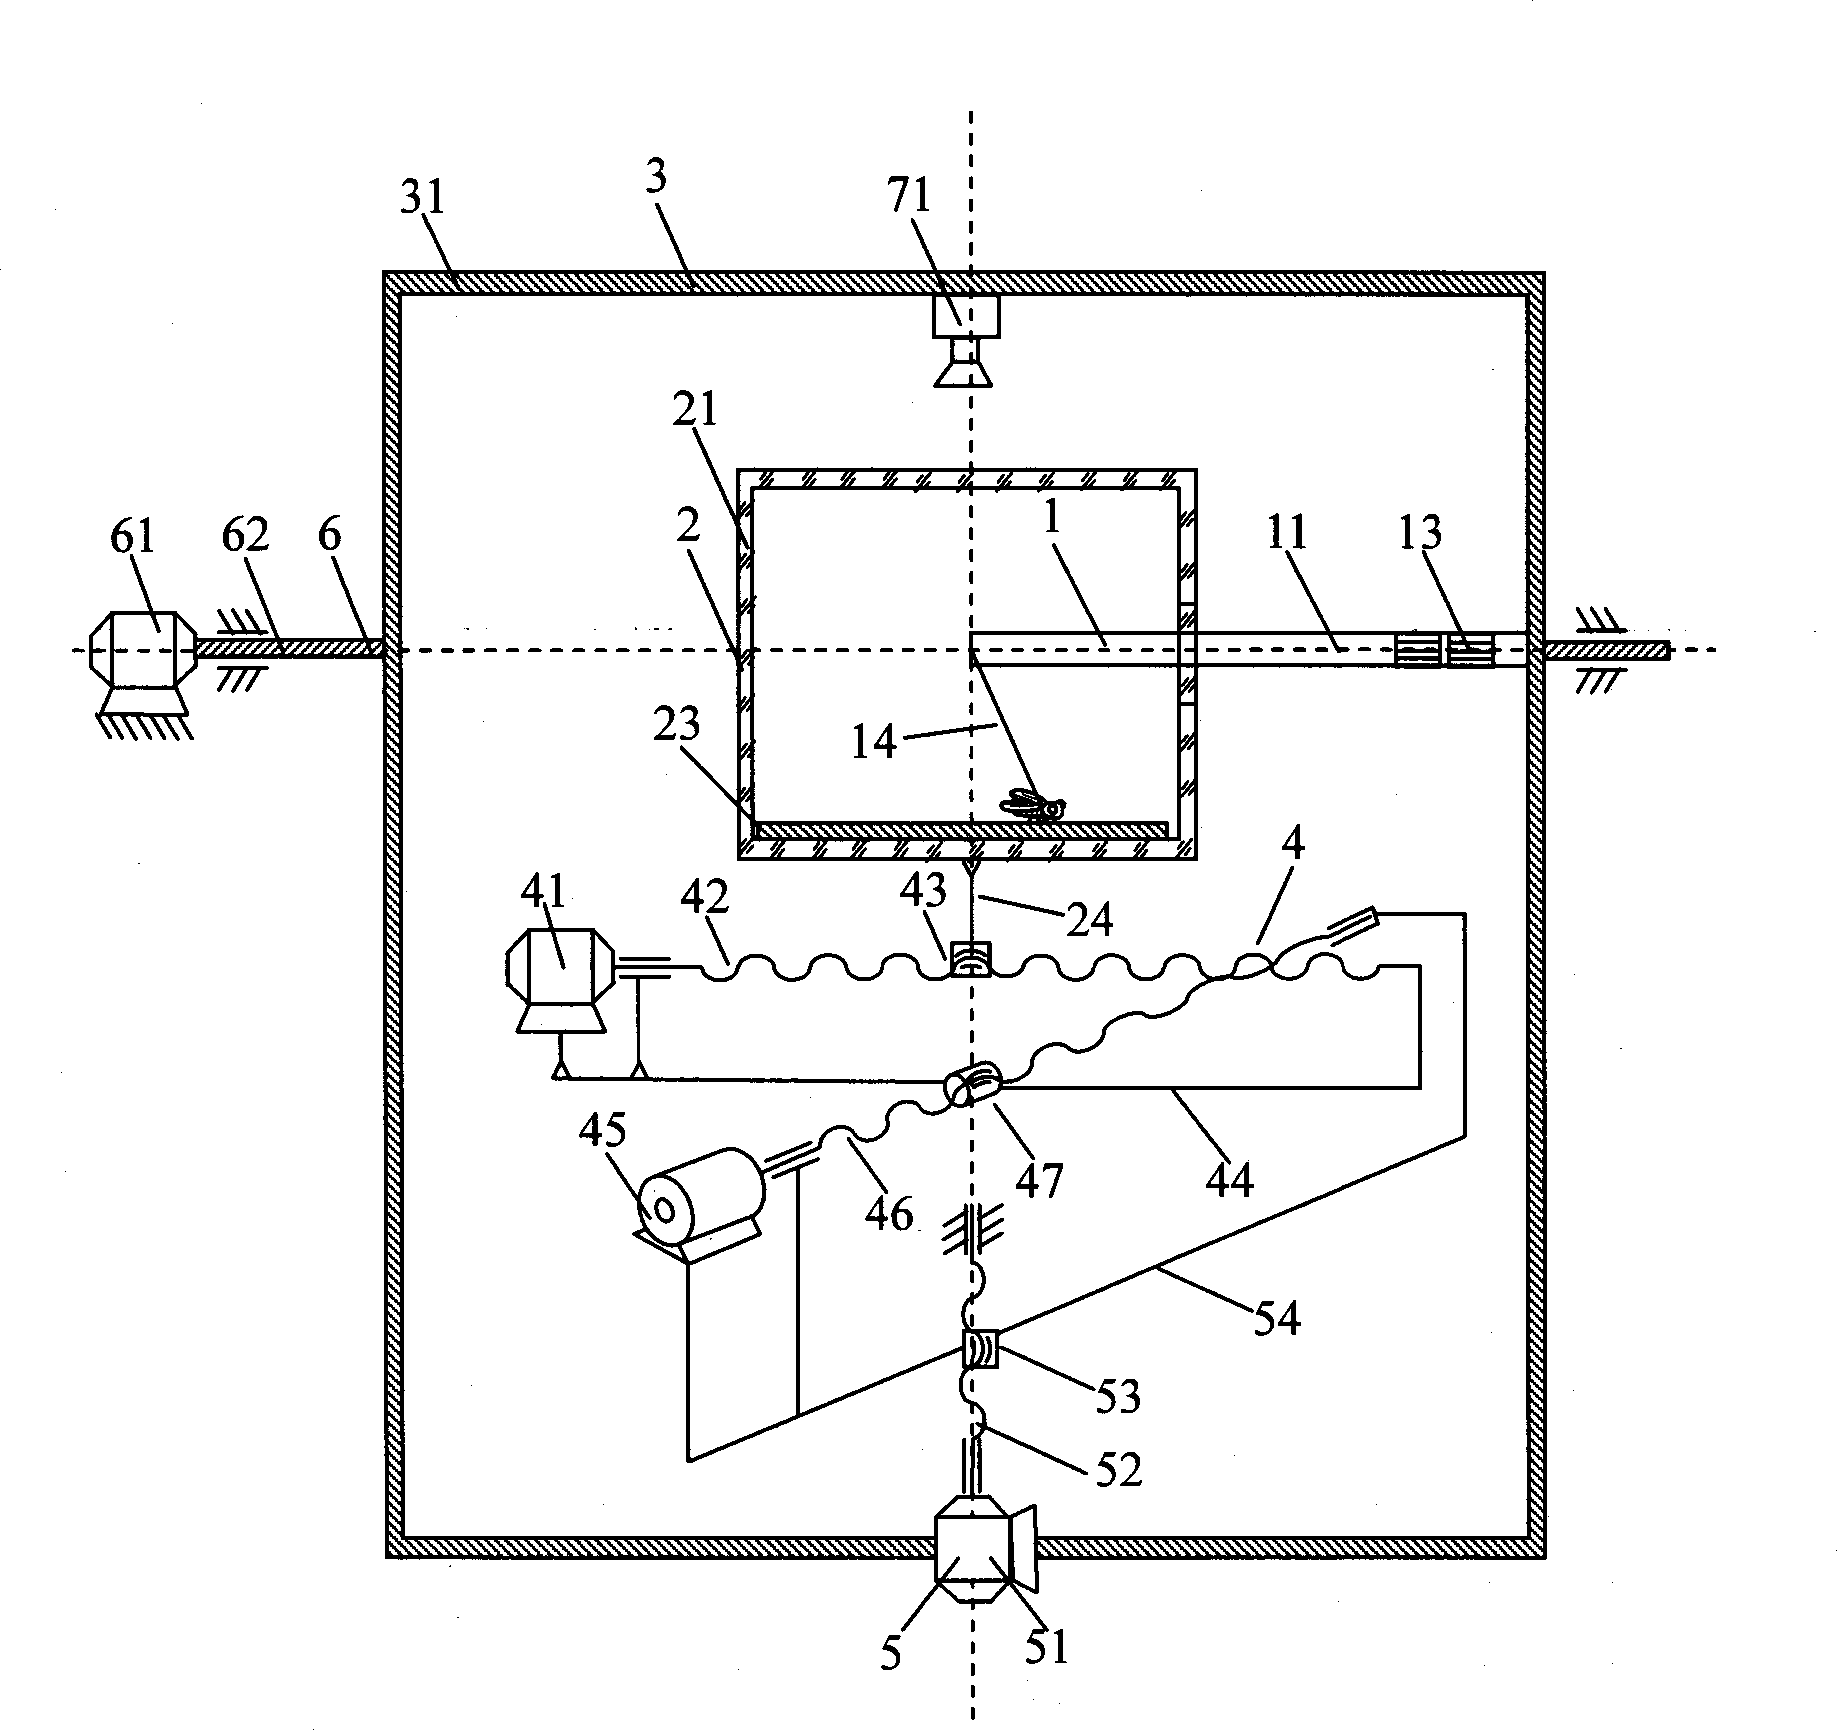 Device and method for measuring climbing force of inset in multiple poses and in different climbing ways